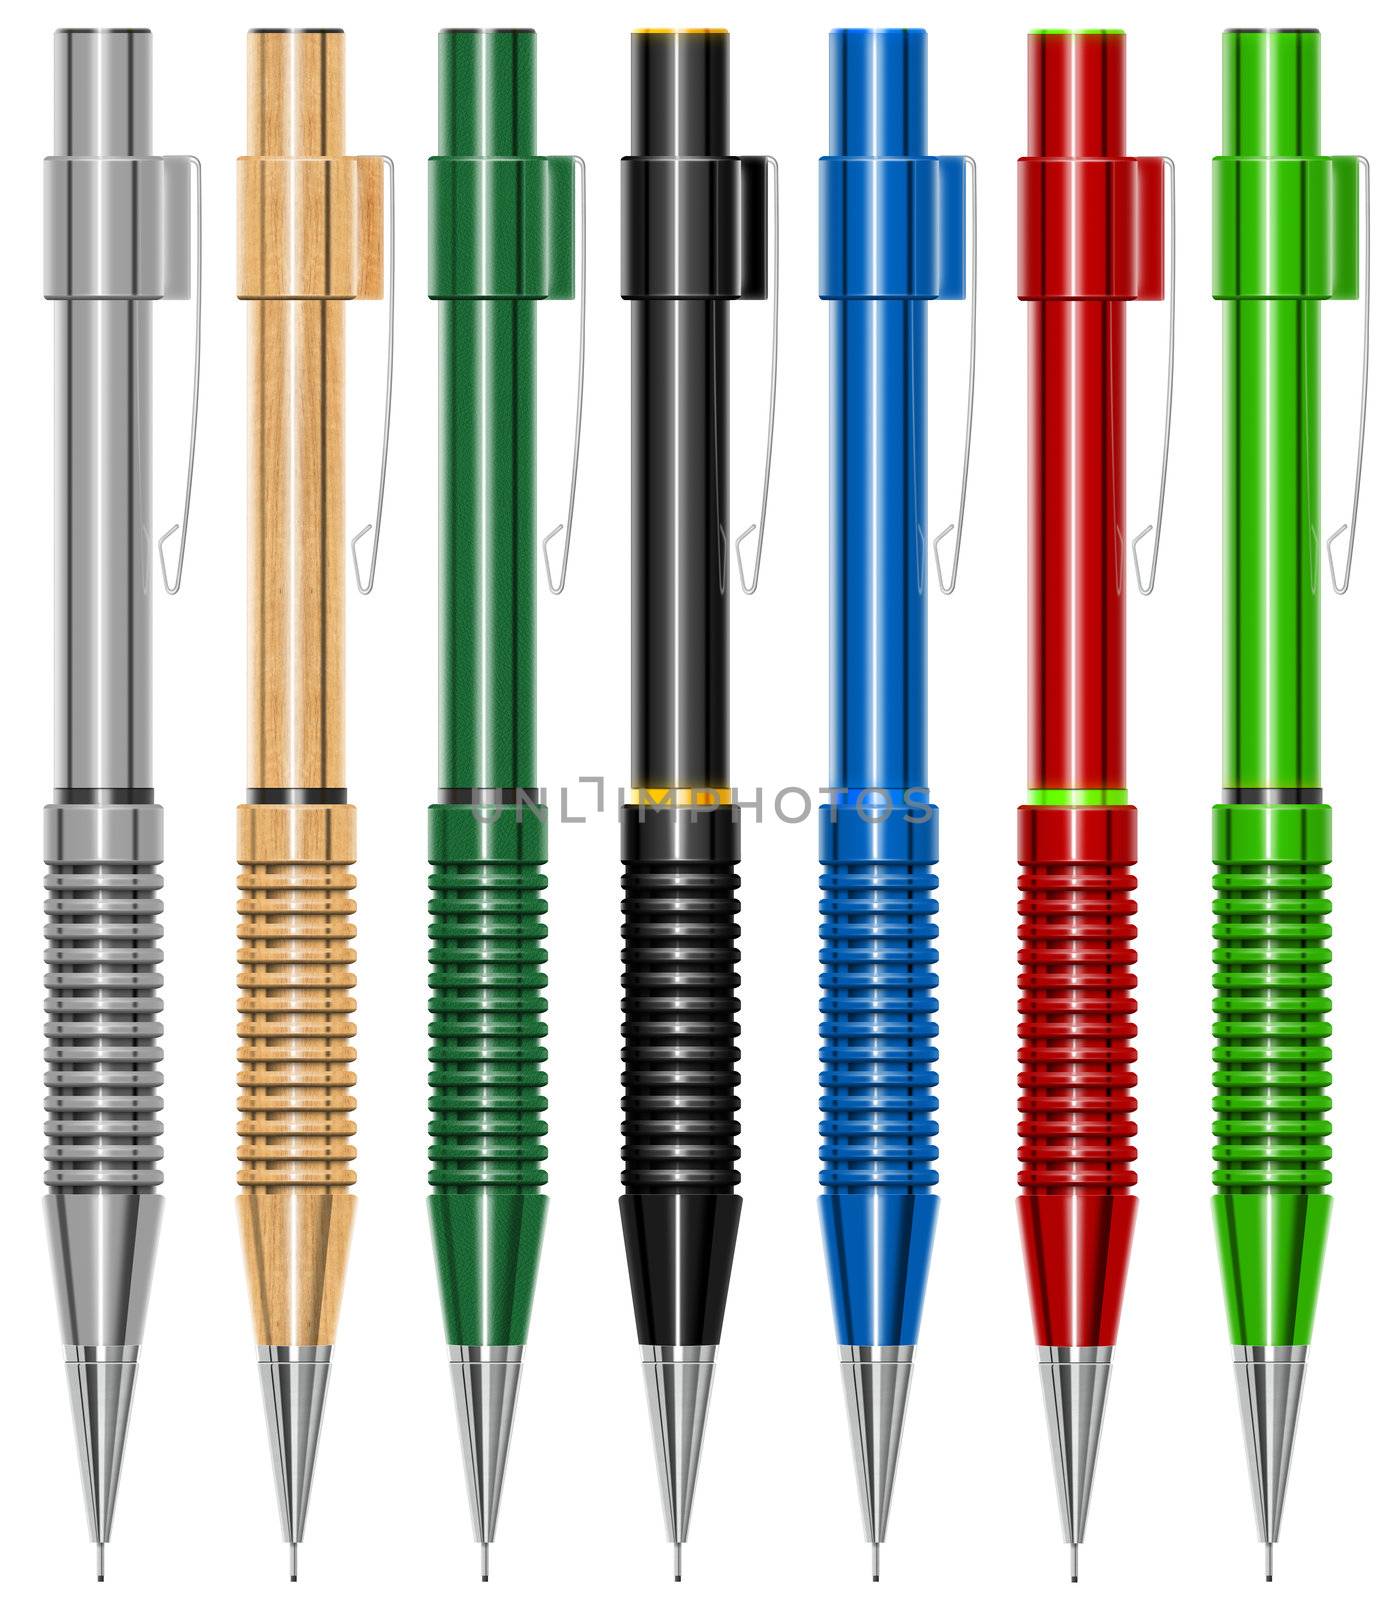 Illustration of 7 multicolored propelling pencils, plastic, wood and leather